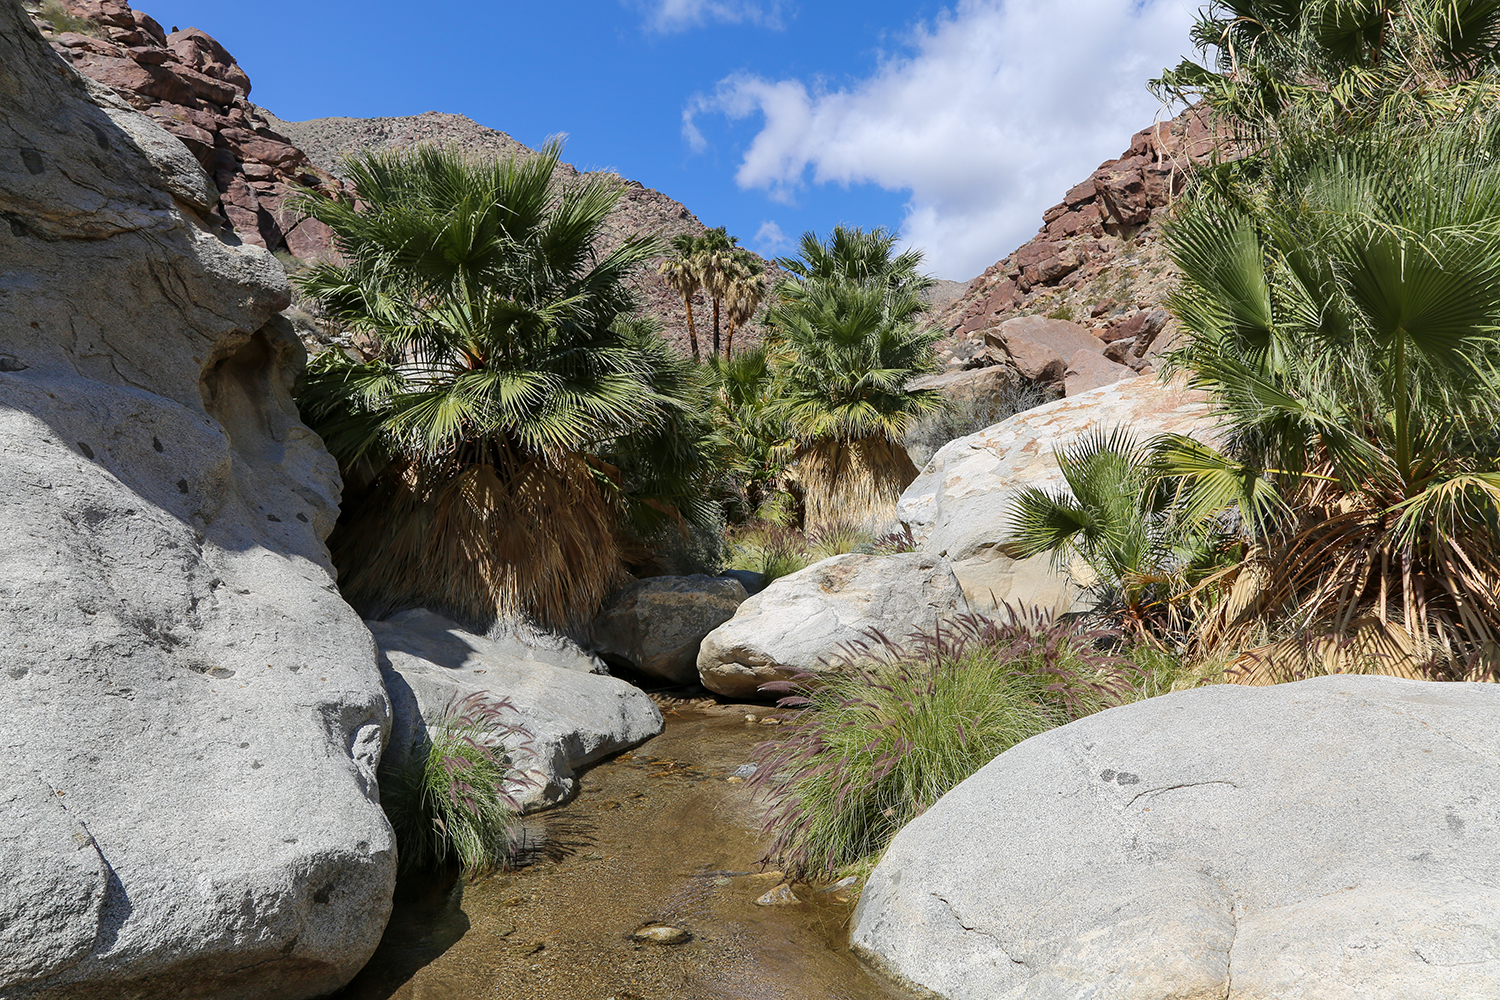 View of the oasis at the Borrego Palm Canyon in Anza Borrego State Park, California.